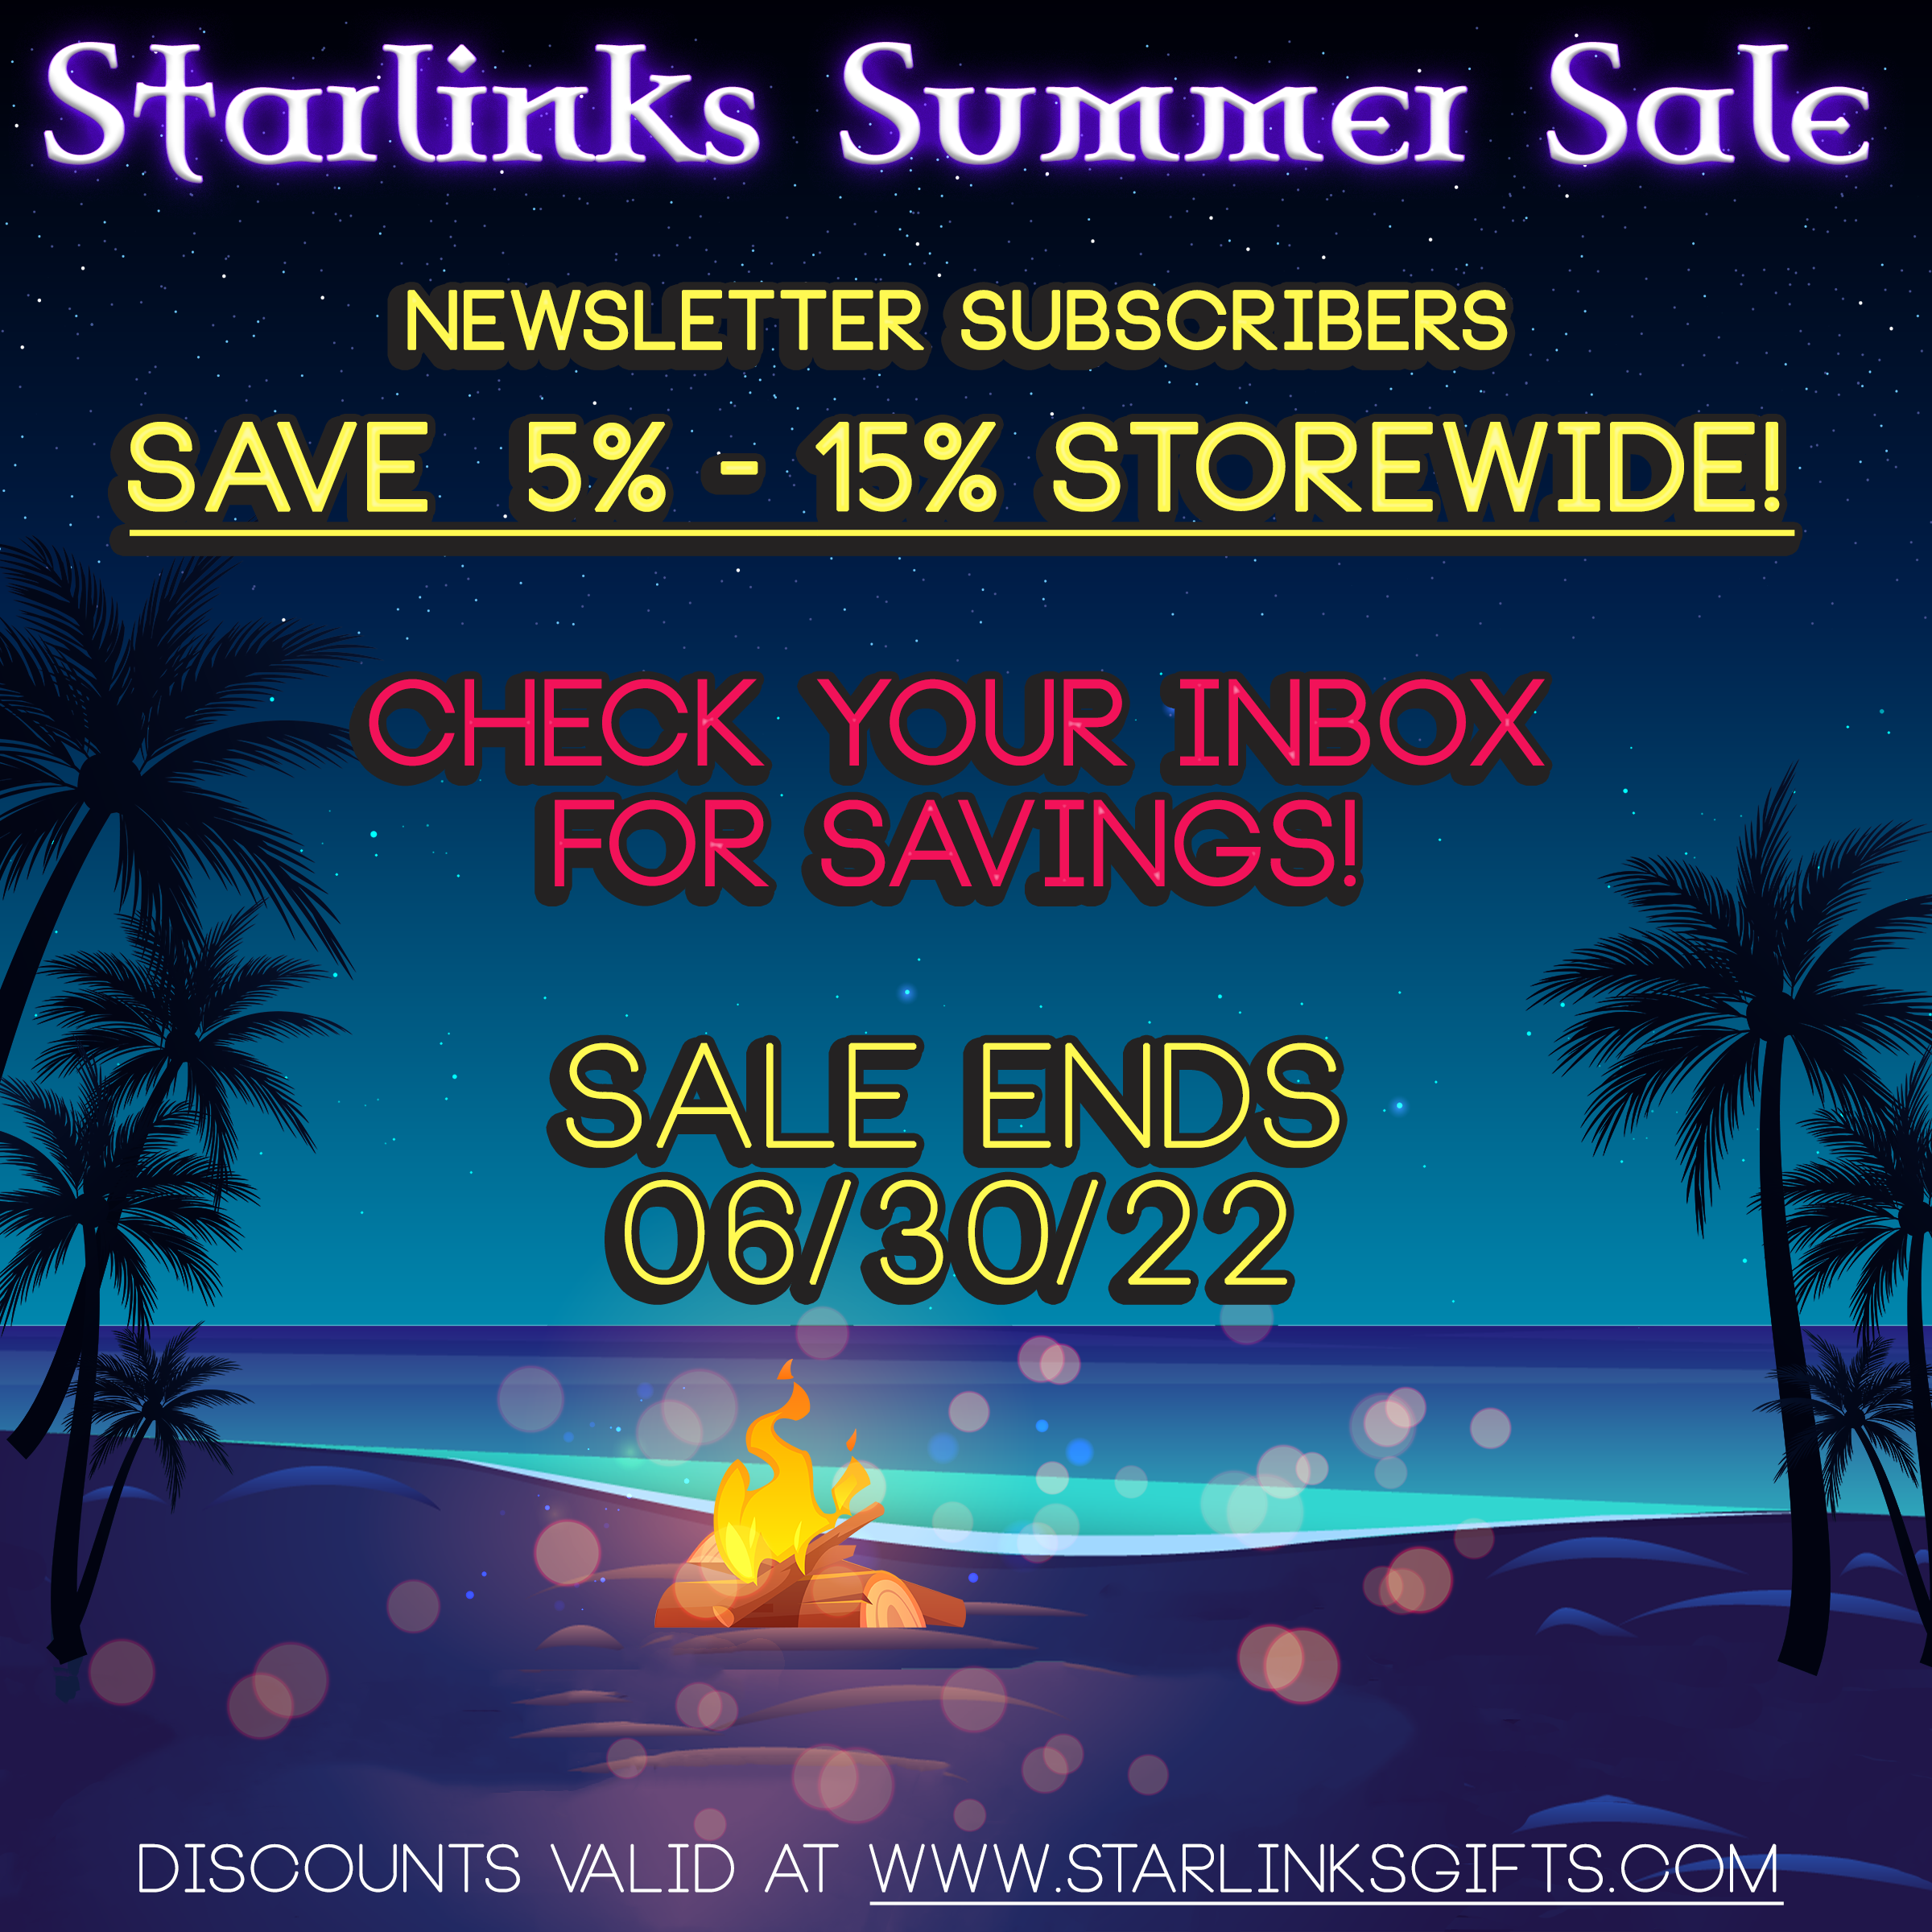 Starlinks Summer Sale is going on now! Check your emails for money-saving offers!